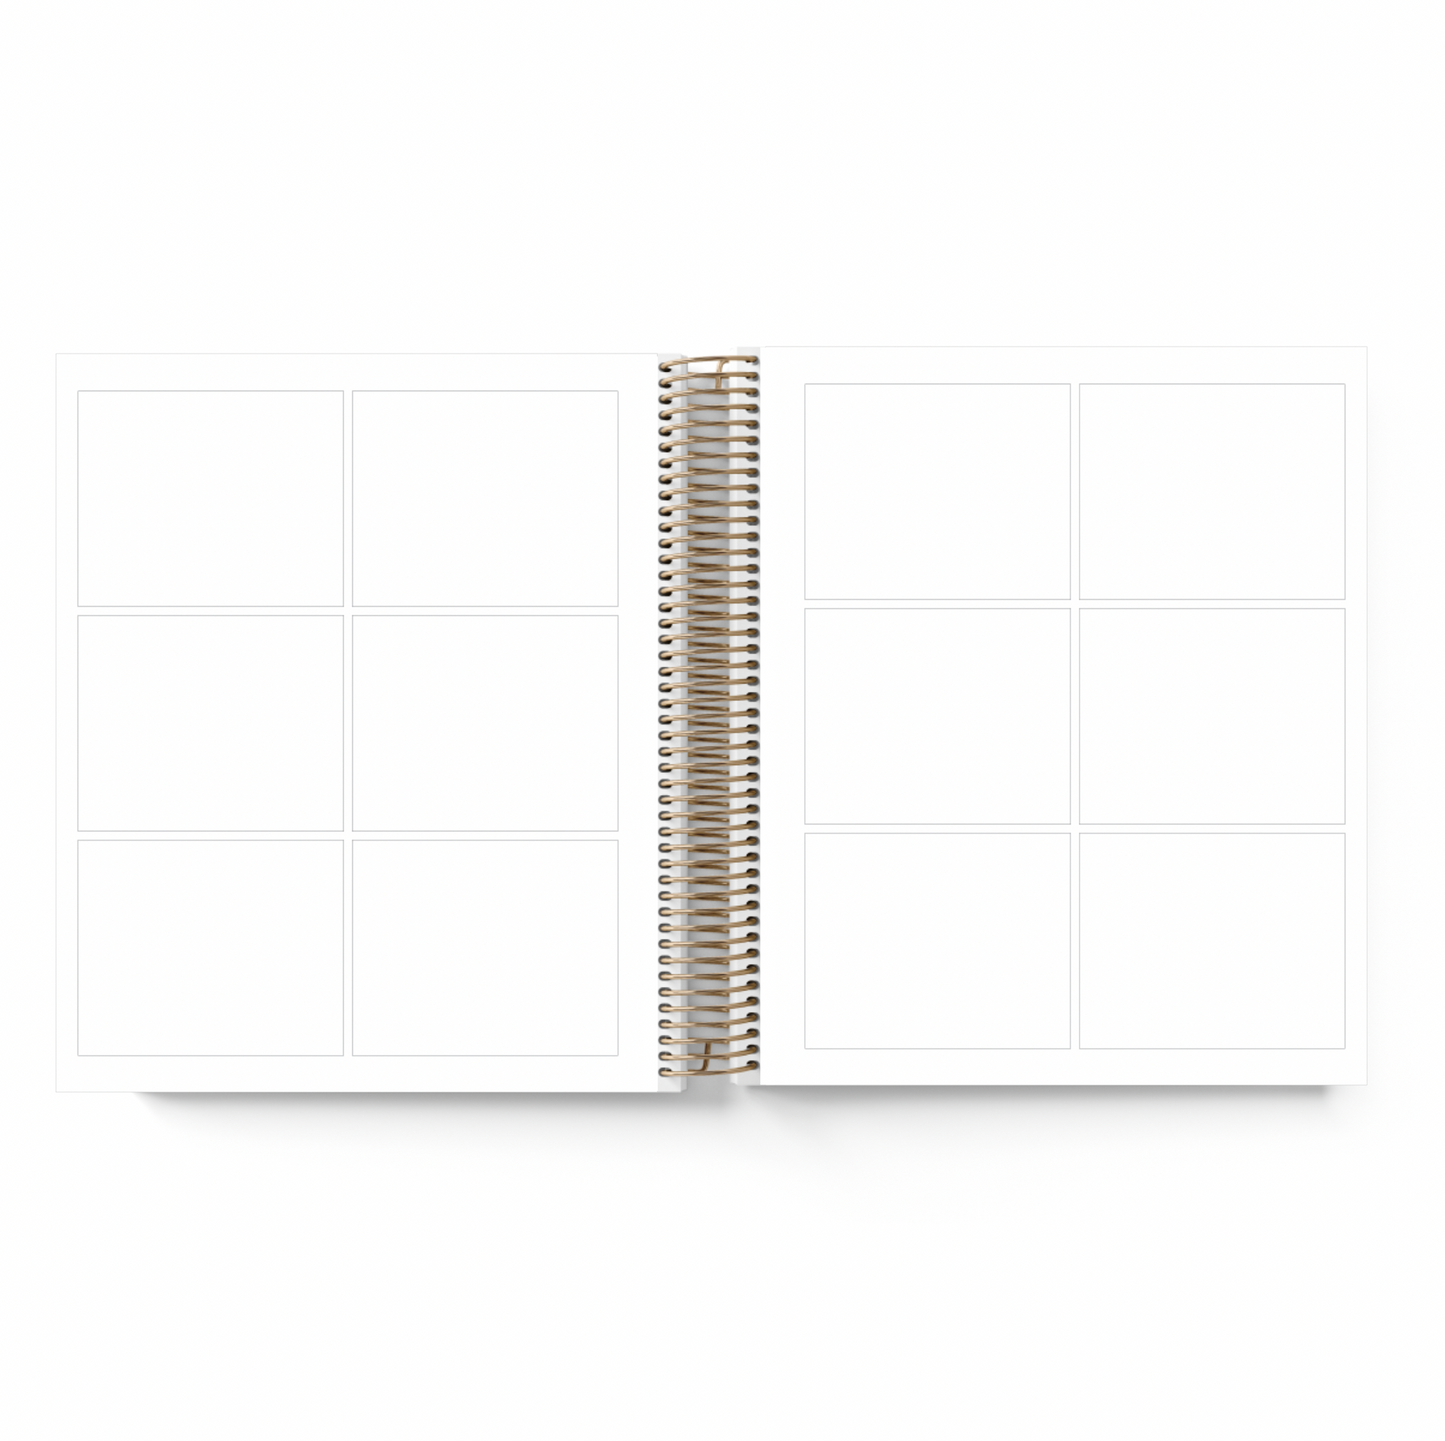 Bloom || A5 Wide Horizontal Planner